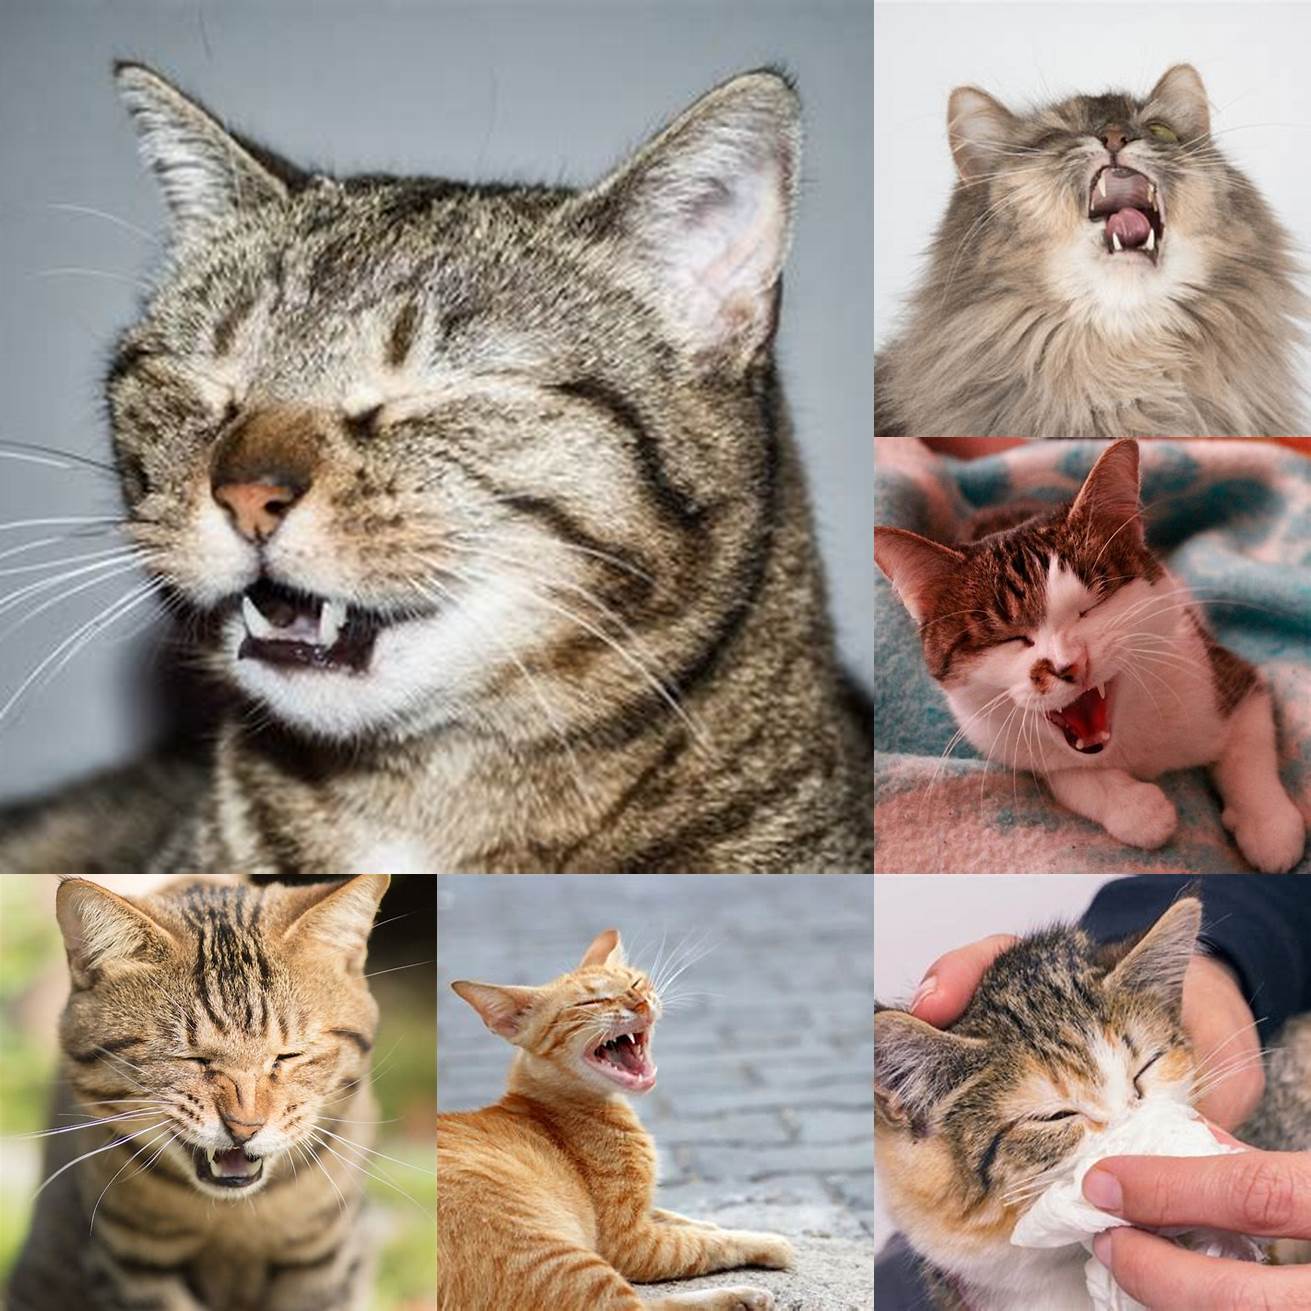 Image of a cat sneezing